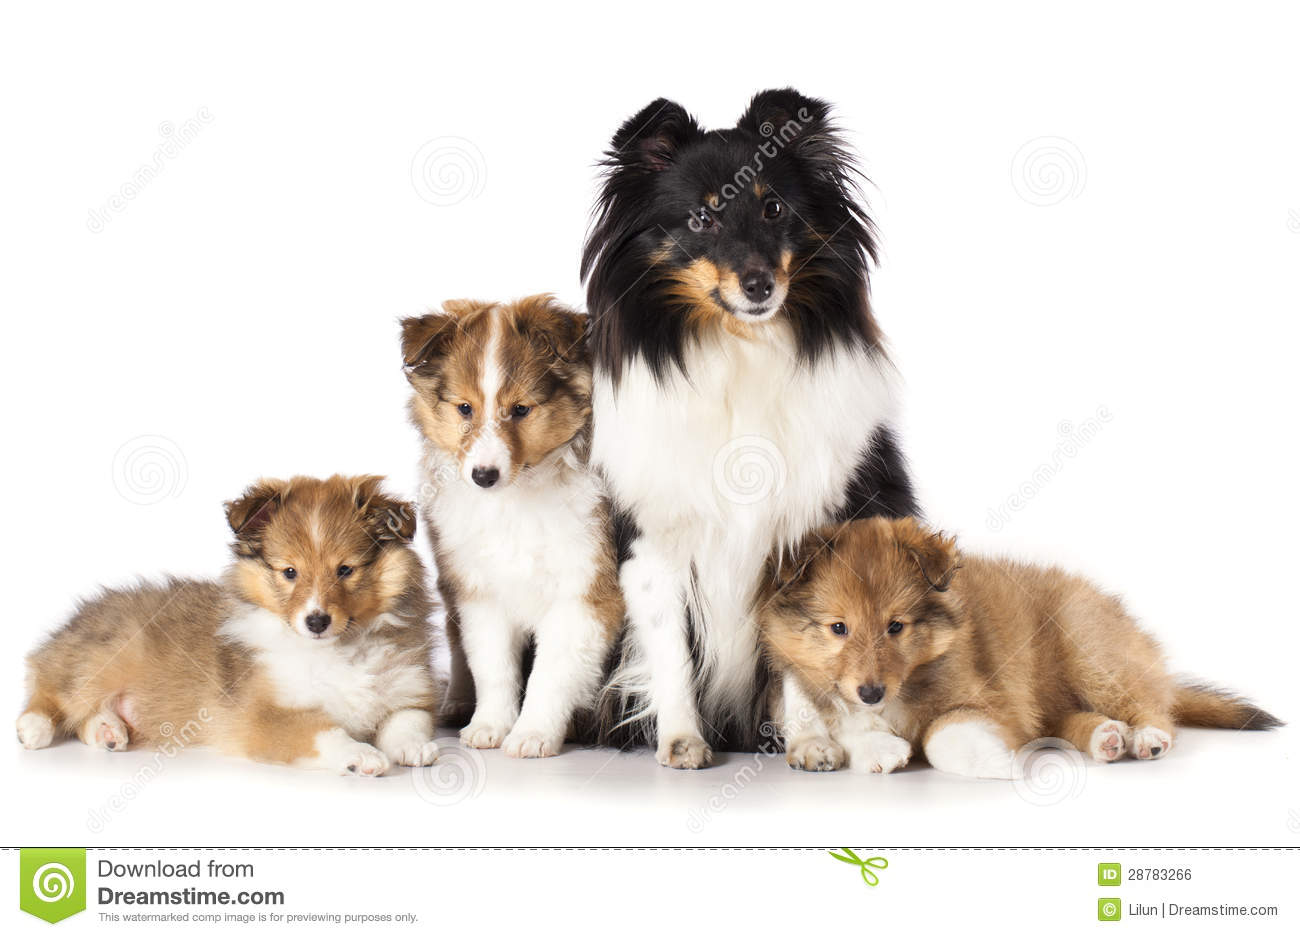 Sheltie Puppies And Mother Dog Royalty Free Stock Image   Image    